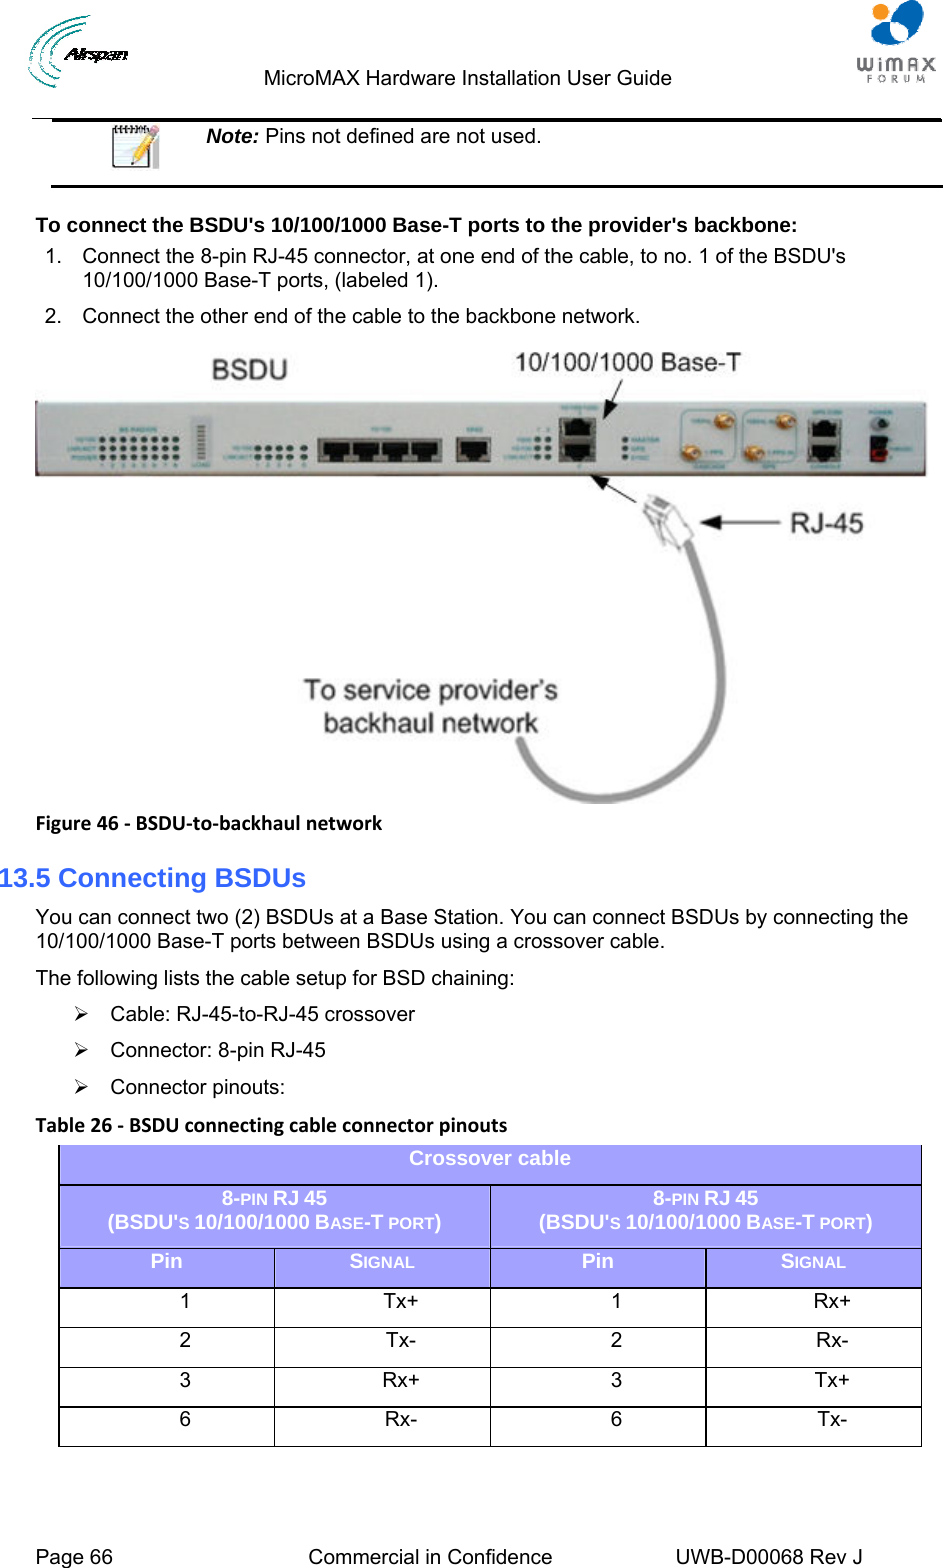                                  MicroMAX Hardware Installation User Guide  Page 66  Commercial in Confidence  UWB-D00068 Rev J    Note: Pins not defined are not used.  To connect the BSDU&apos;s 10/100/1000 Base-T ports to the provider&apos;s backbone: 1.  Connect the 8-pin RJ-45 connector, at one end of the cable, to no. 1 of the BSDU&apos;s 10/100/1000 Base-T ports, (labeled 1). 2.  Connect the other end of the cable to the backbone network.  Figure46‐BSDU‐to‐backhaulnetwork13.5 Connecting BSDUs You can connect two (2) BSDUs at a Base Station. You can connect BSDUs by connecting the 10/100/1000 Base-T ports between BSDUs using a crossover cable. The following lists the cable setup for BSD chaining: ¾ Cable: RJ-45-to-RJ-45 crossover ¾  Connector: 8-pin RJ-45 ¾ Connector pinouts: Table26‐BSDUconnectingcableconnectorpinoutsCrossover cable 8-PIN RJ 45 (BSDU&apos;S 10/100/1000 BASE-T PORT)  8-PIN RJ 45 (BSDU&apos;S 10/100/1000 BASE-T PORT) Pin  SIGNAL Pin  SIGNAL 1 Tx+ 1 Rx+ 2 Tx- 2 Rx- 3 Rx+ 3 Tx+ 6 Rx- 6 Tx-  